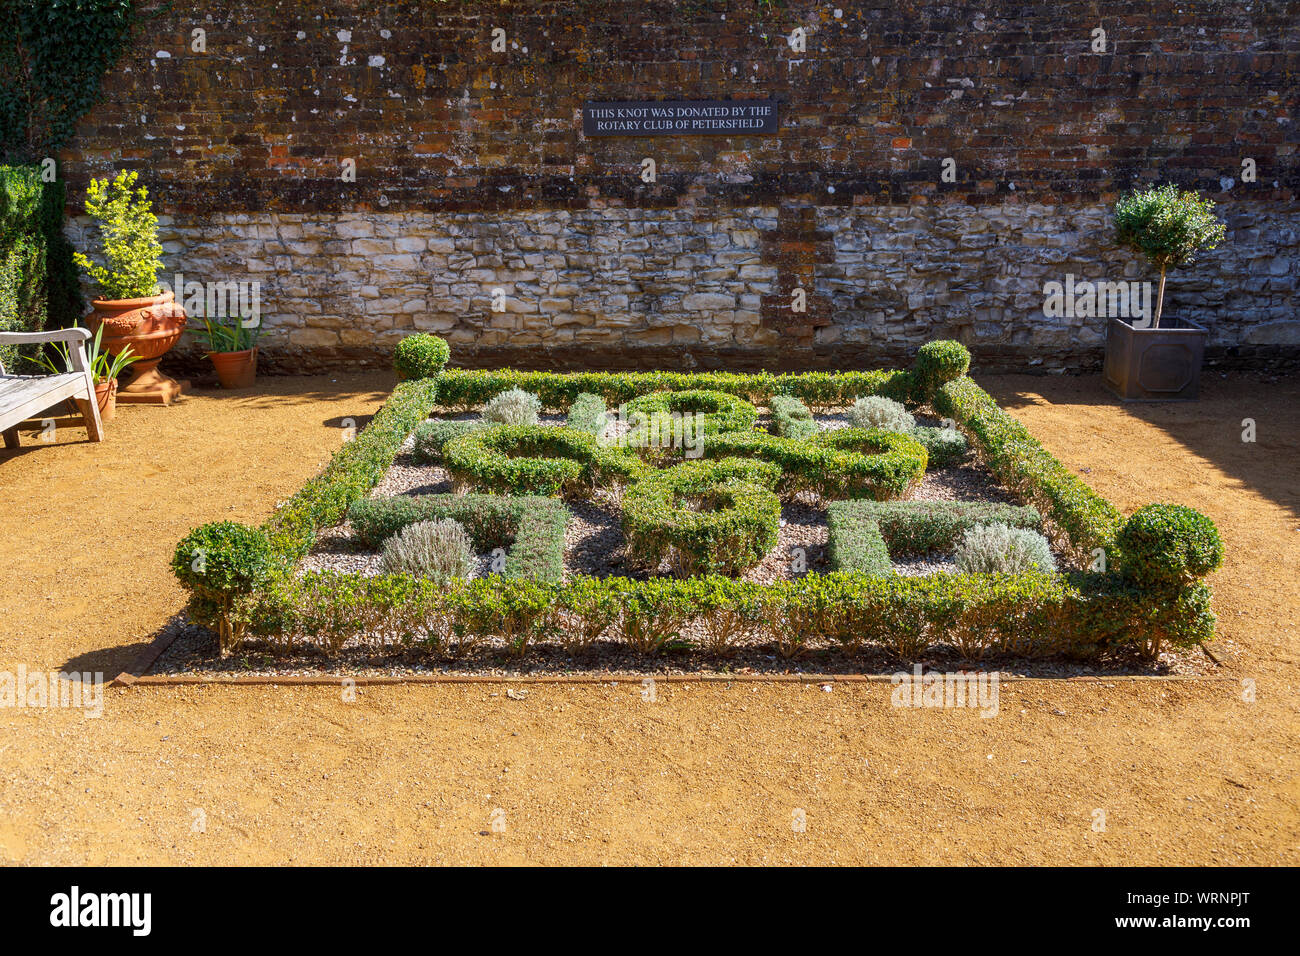 Yew knot garden in the Physic Garden, a botanical herb garden open to the public in the market town of Petersfield, Hampshire, southern England, UK Stock Photo